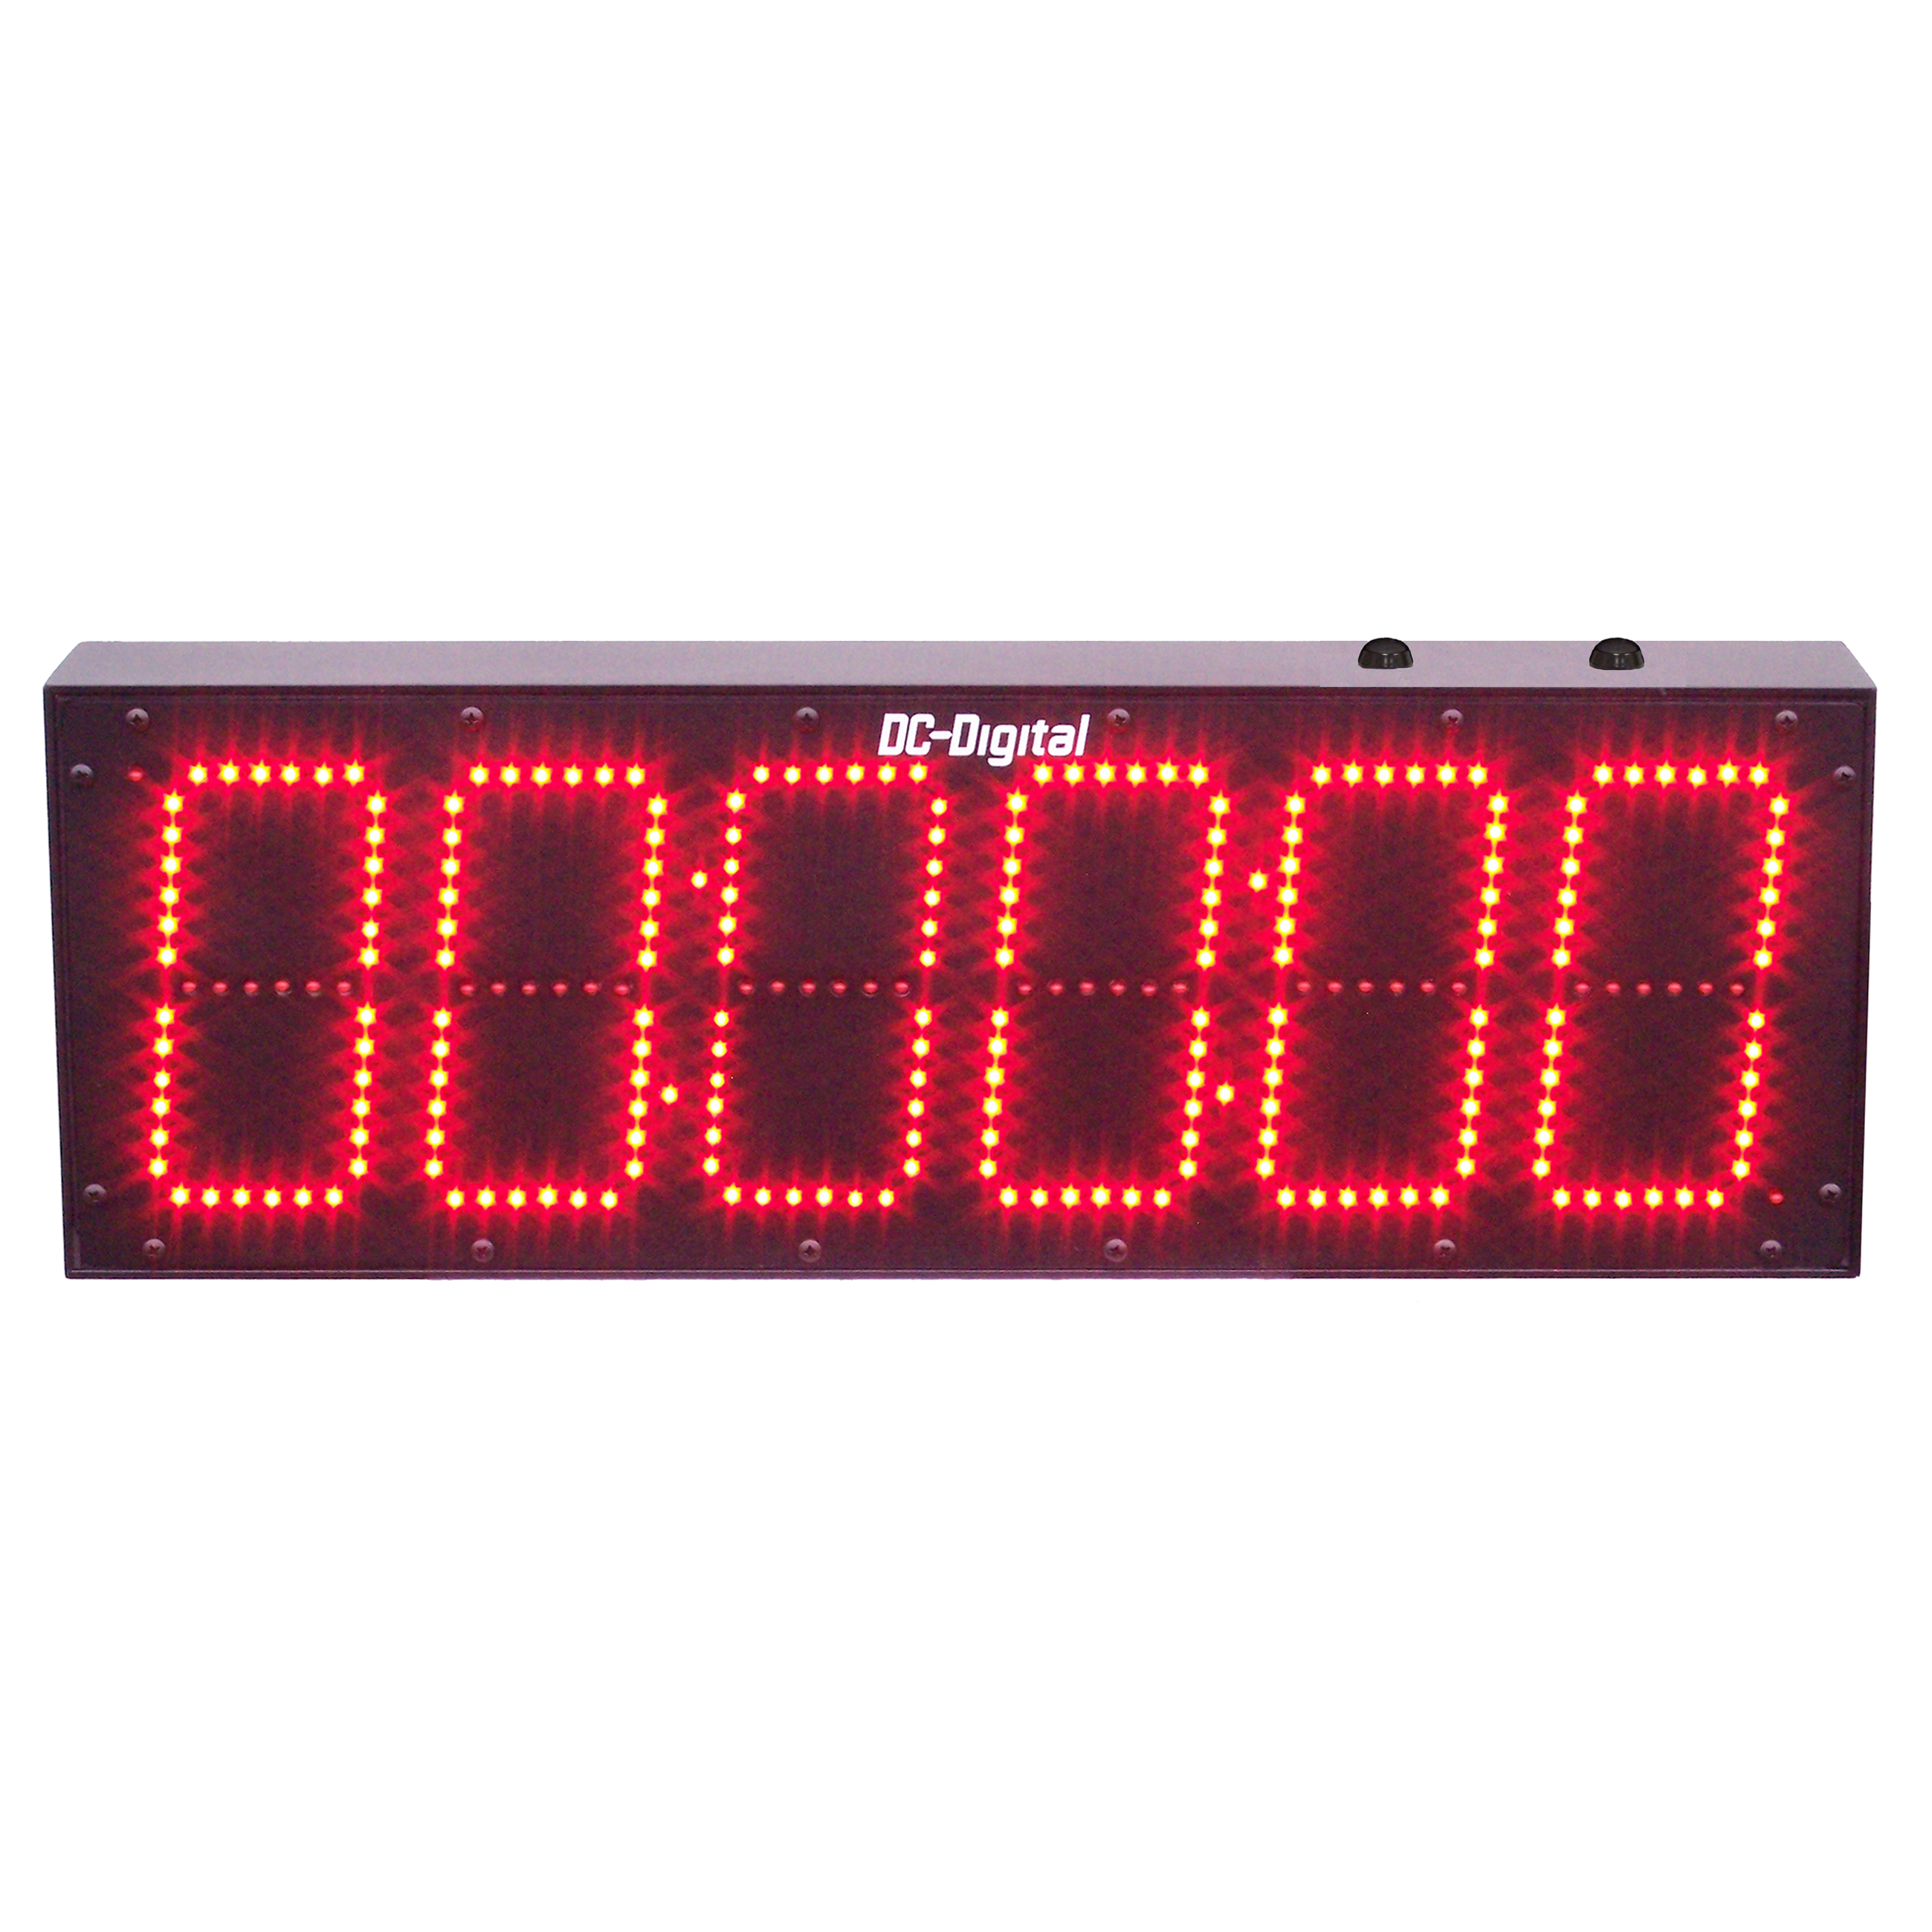 (DC-606T-UP-IN) 6.0 Inch LED Digital, Push-Button Controlled, Count Up Timer, Hours, Minutes, Seconds (INDOOR)